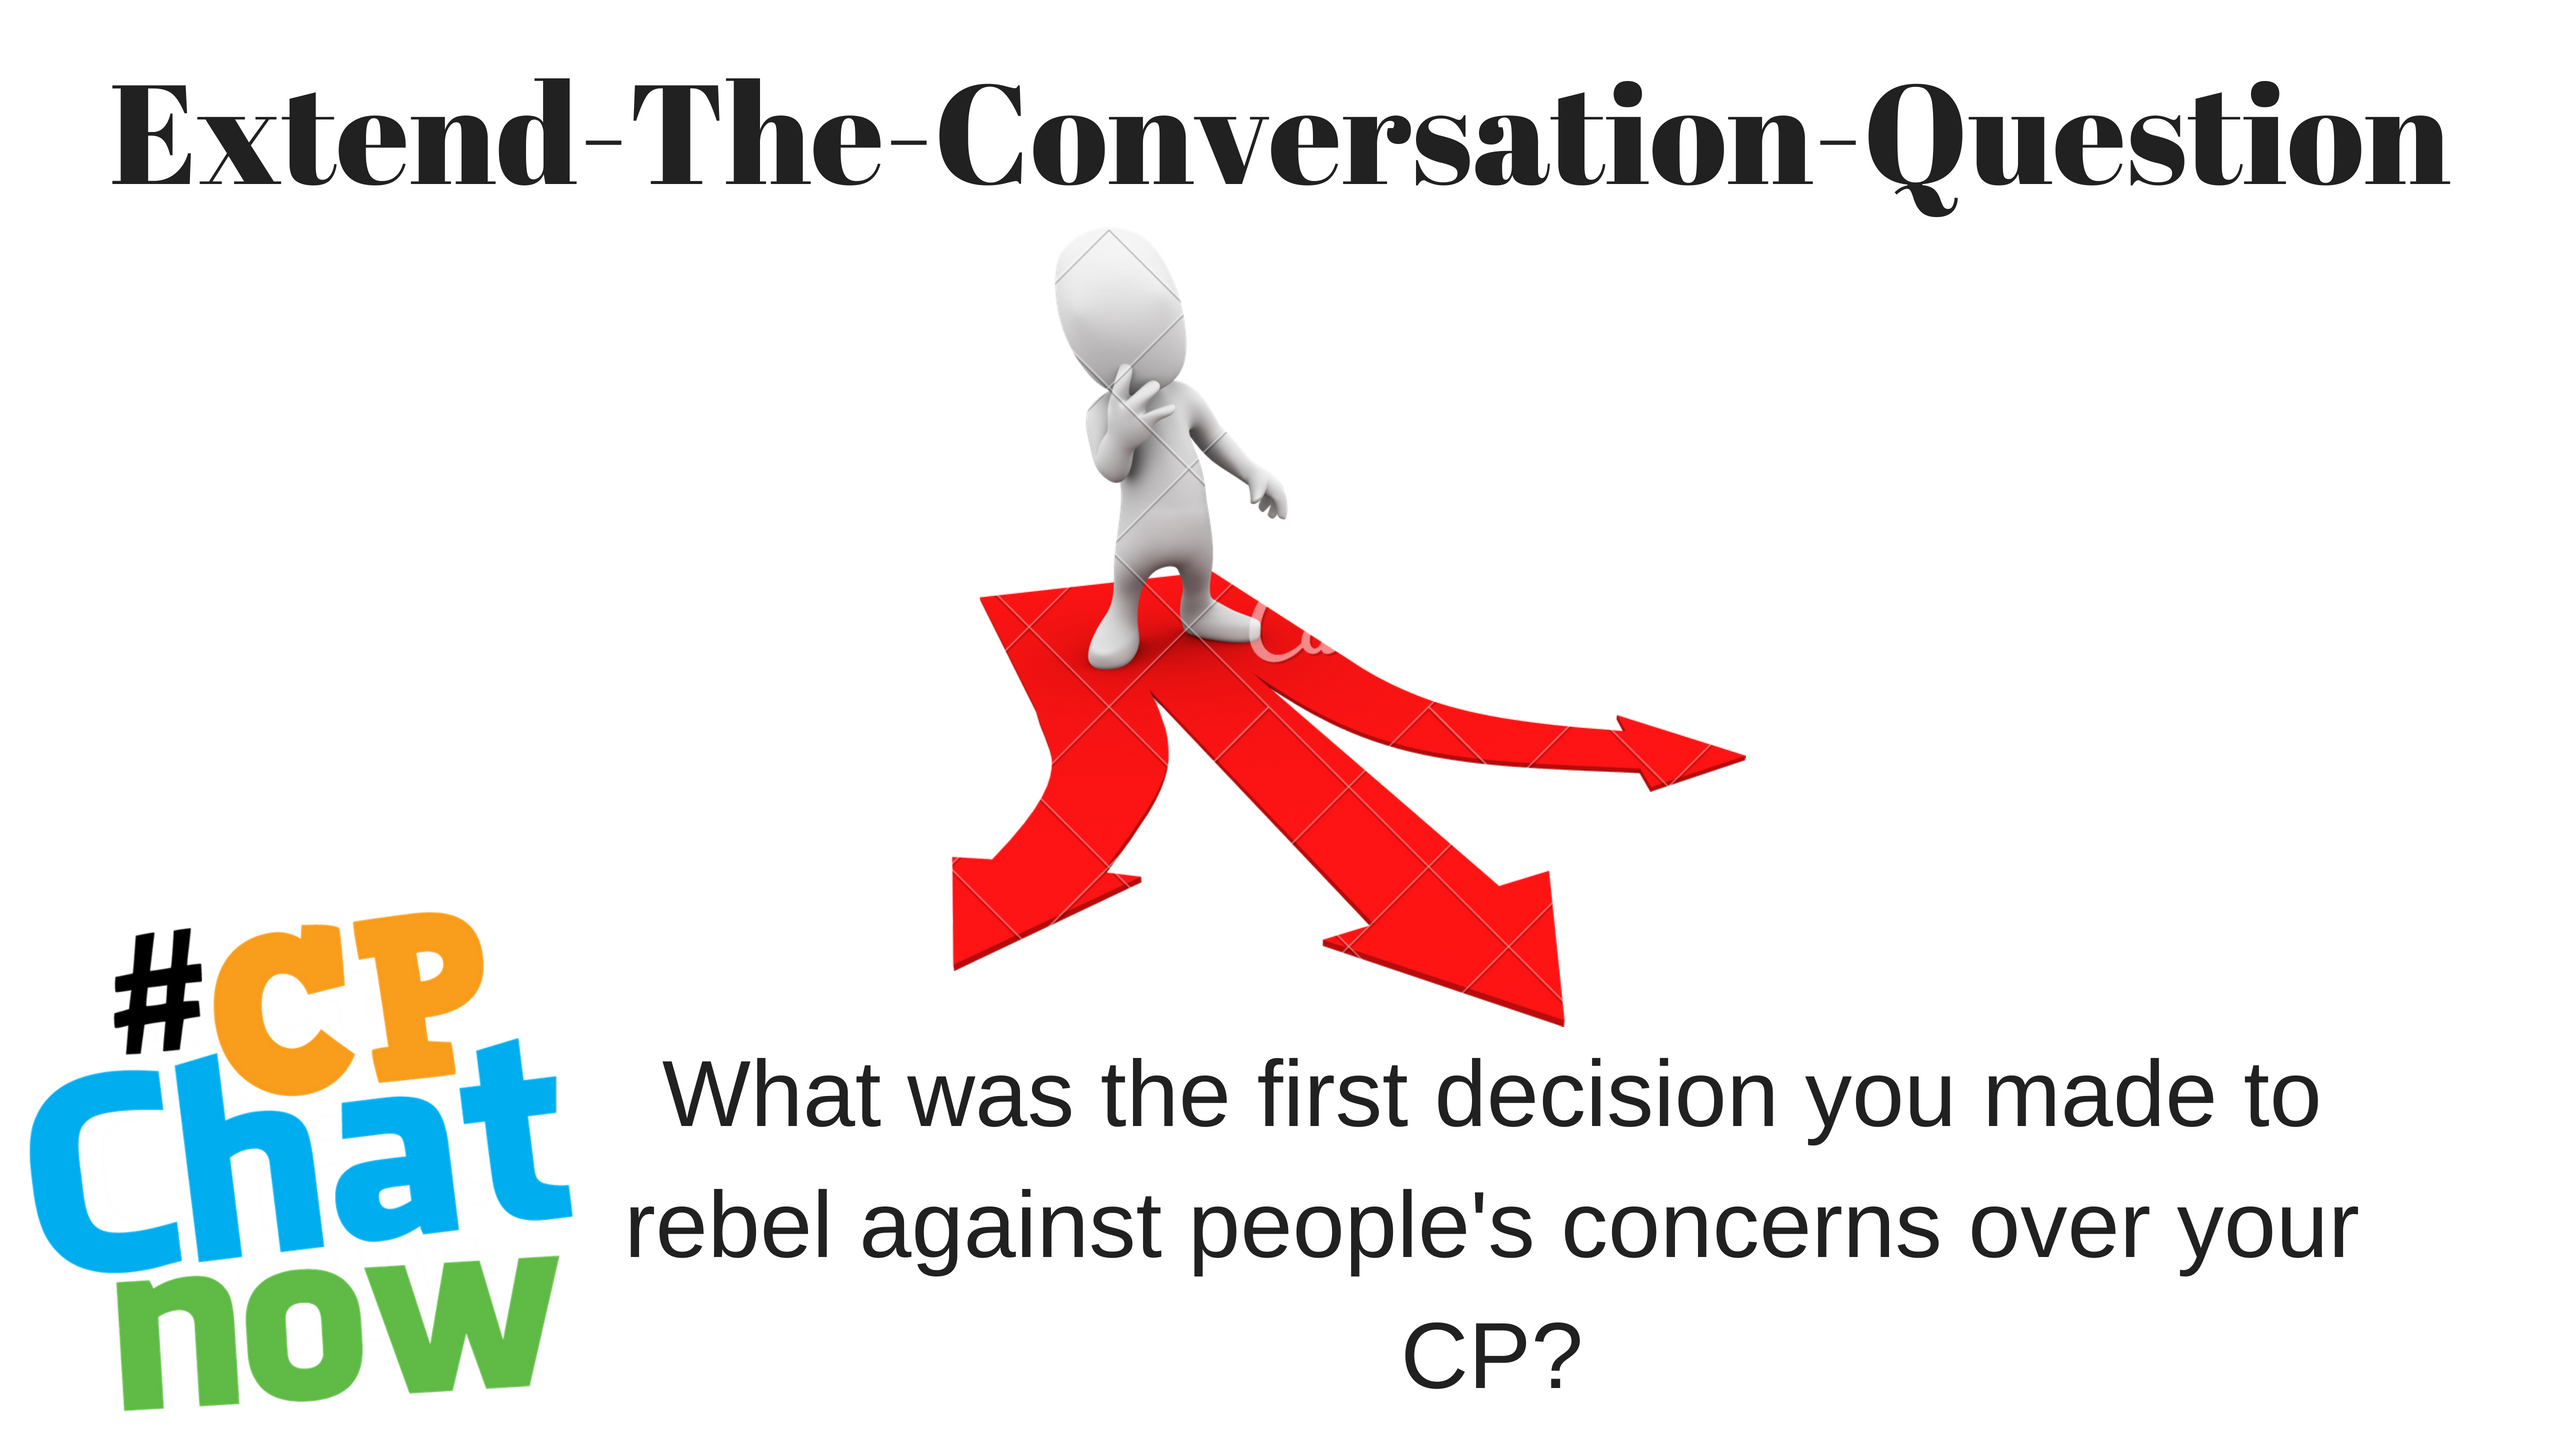 Extend-The-Conversation-Question in black text at top. A grey person standing with hand up to his chin as if thinking with 3 red arrows going right, straight, and left. What was the first decision you made to rebel against people's concerns over your CP?What was the first decision you made to rebel against people's concerns over your CP? What was the first decision you made to rebel against people's concerns over your CP? is below in black text. Multicolor #CPChatNow logo in left hand corner